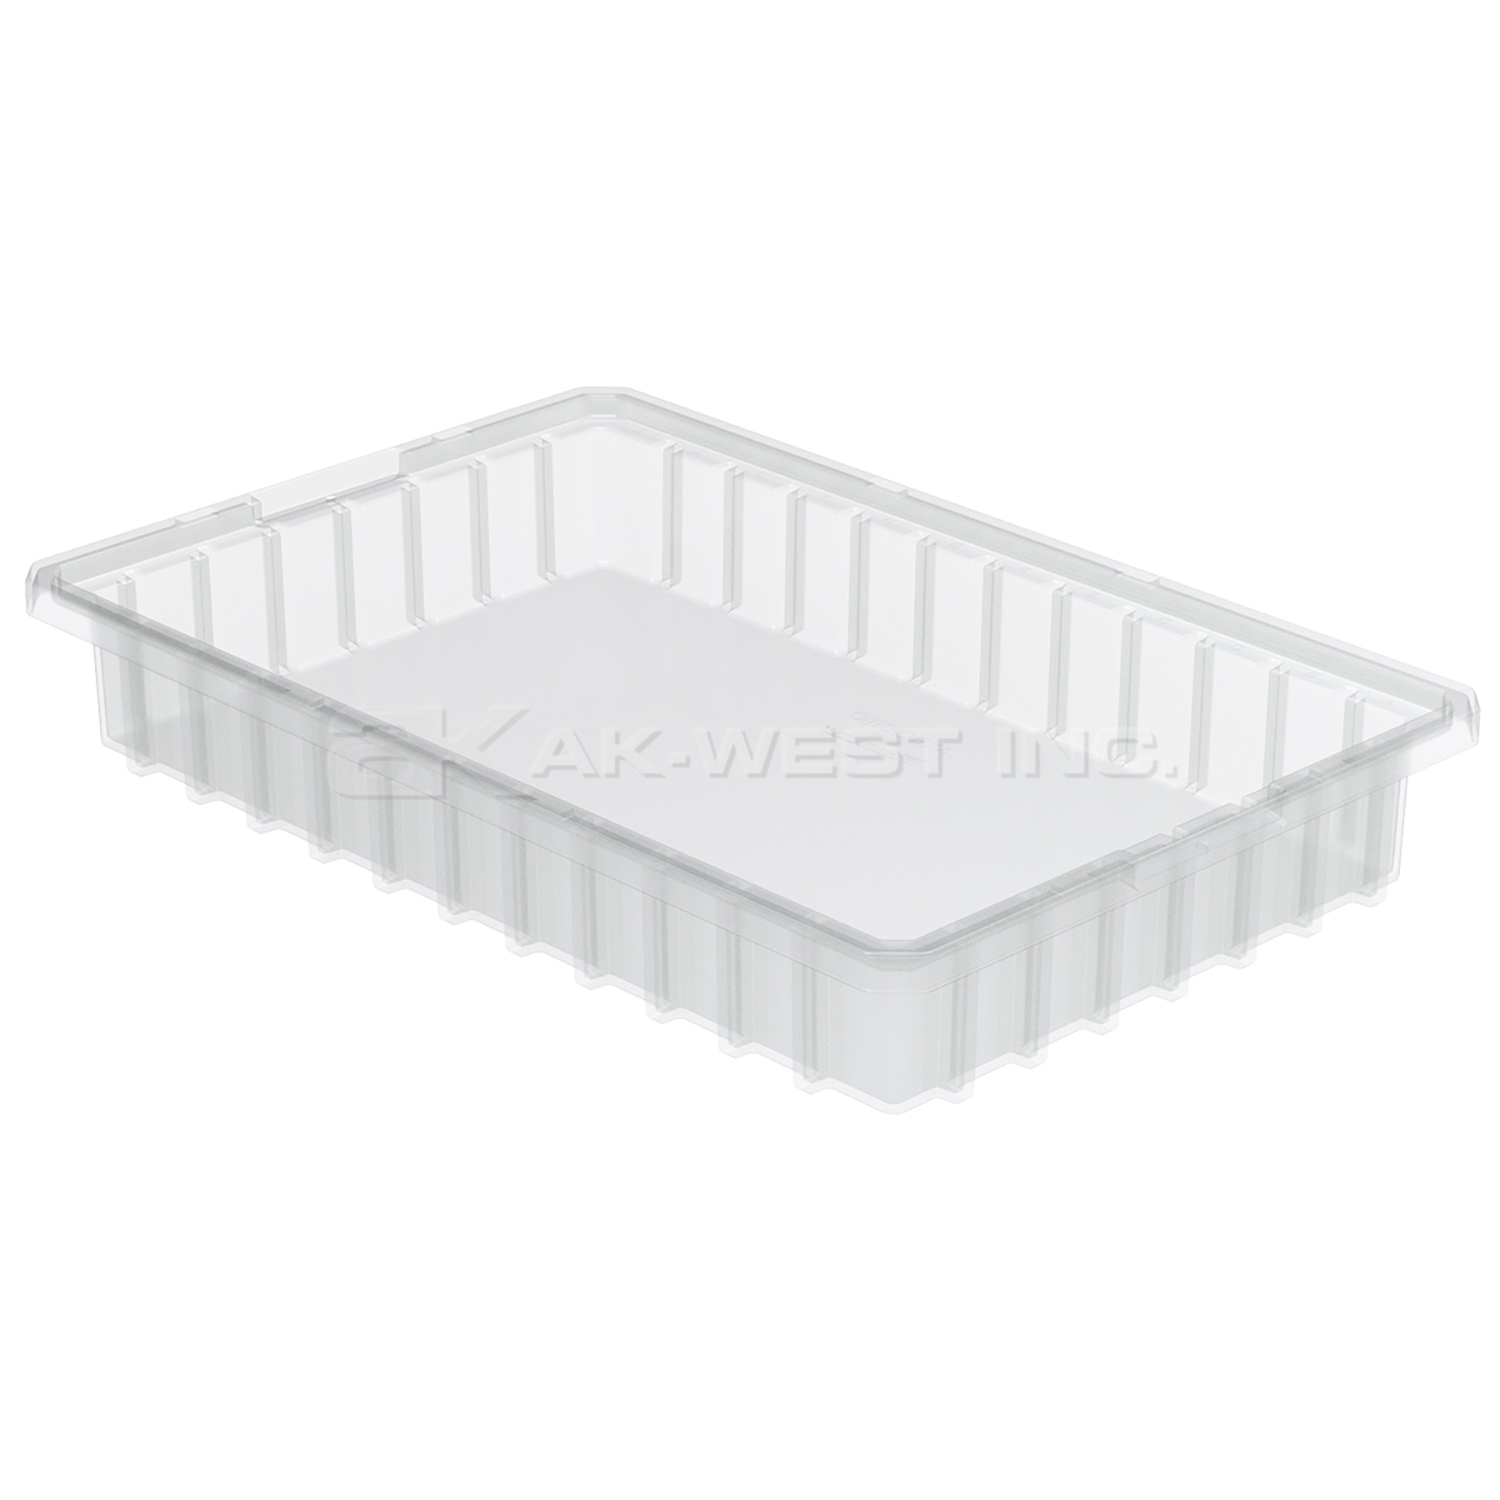 Clear, 22-1/2" x 17-3/8" x 3" Dividable Grid Container (6 Per Carton)